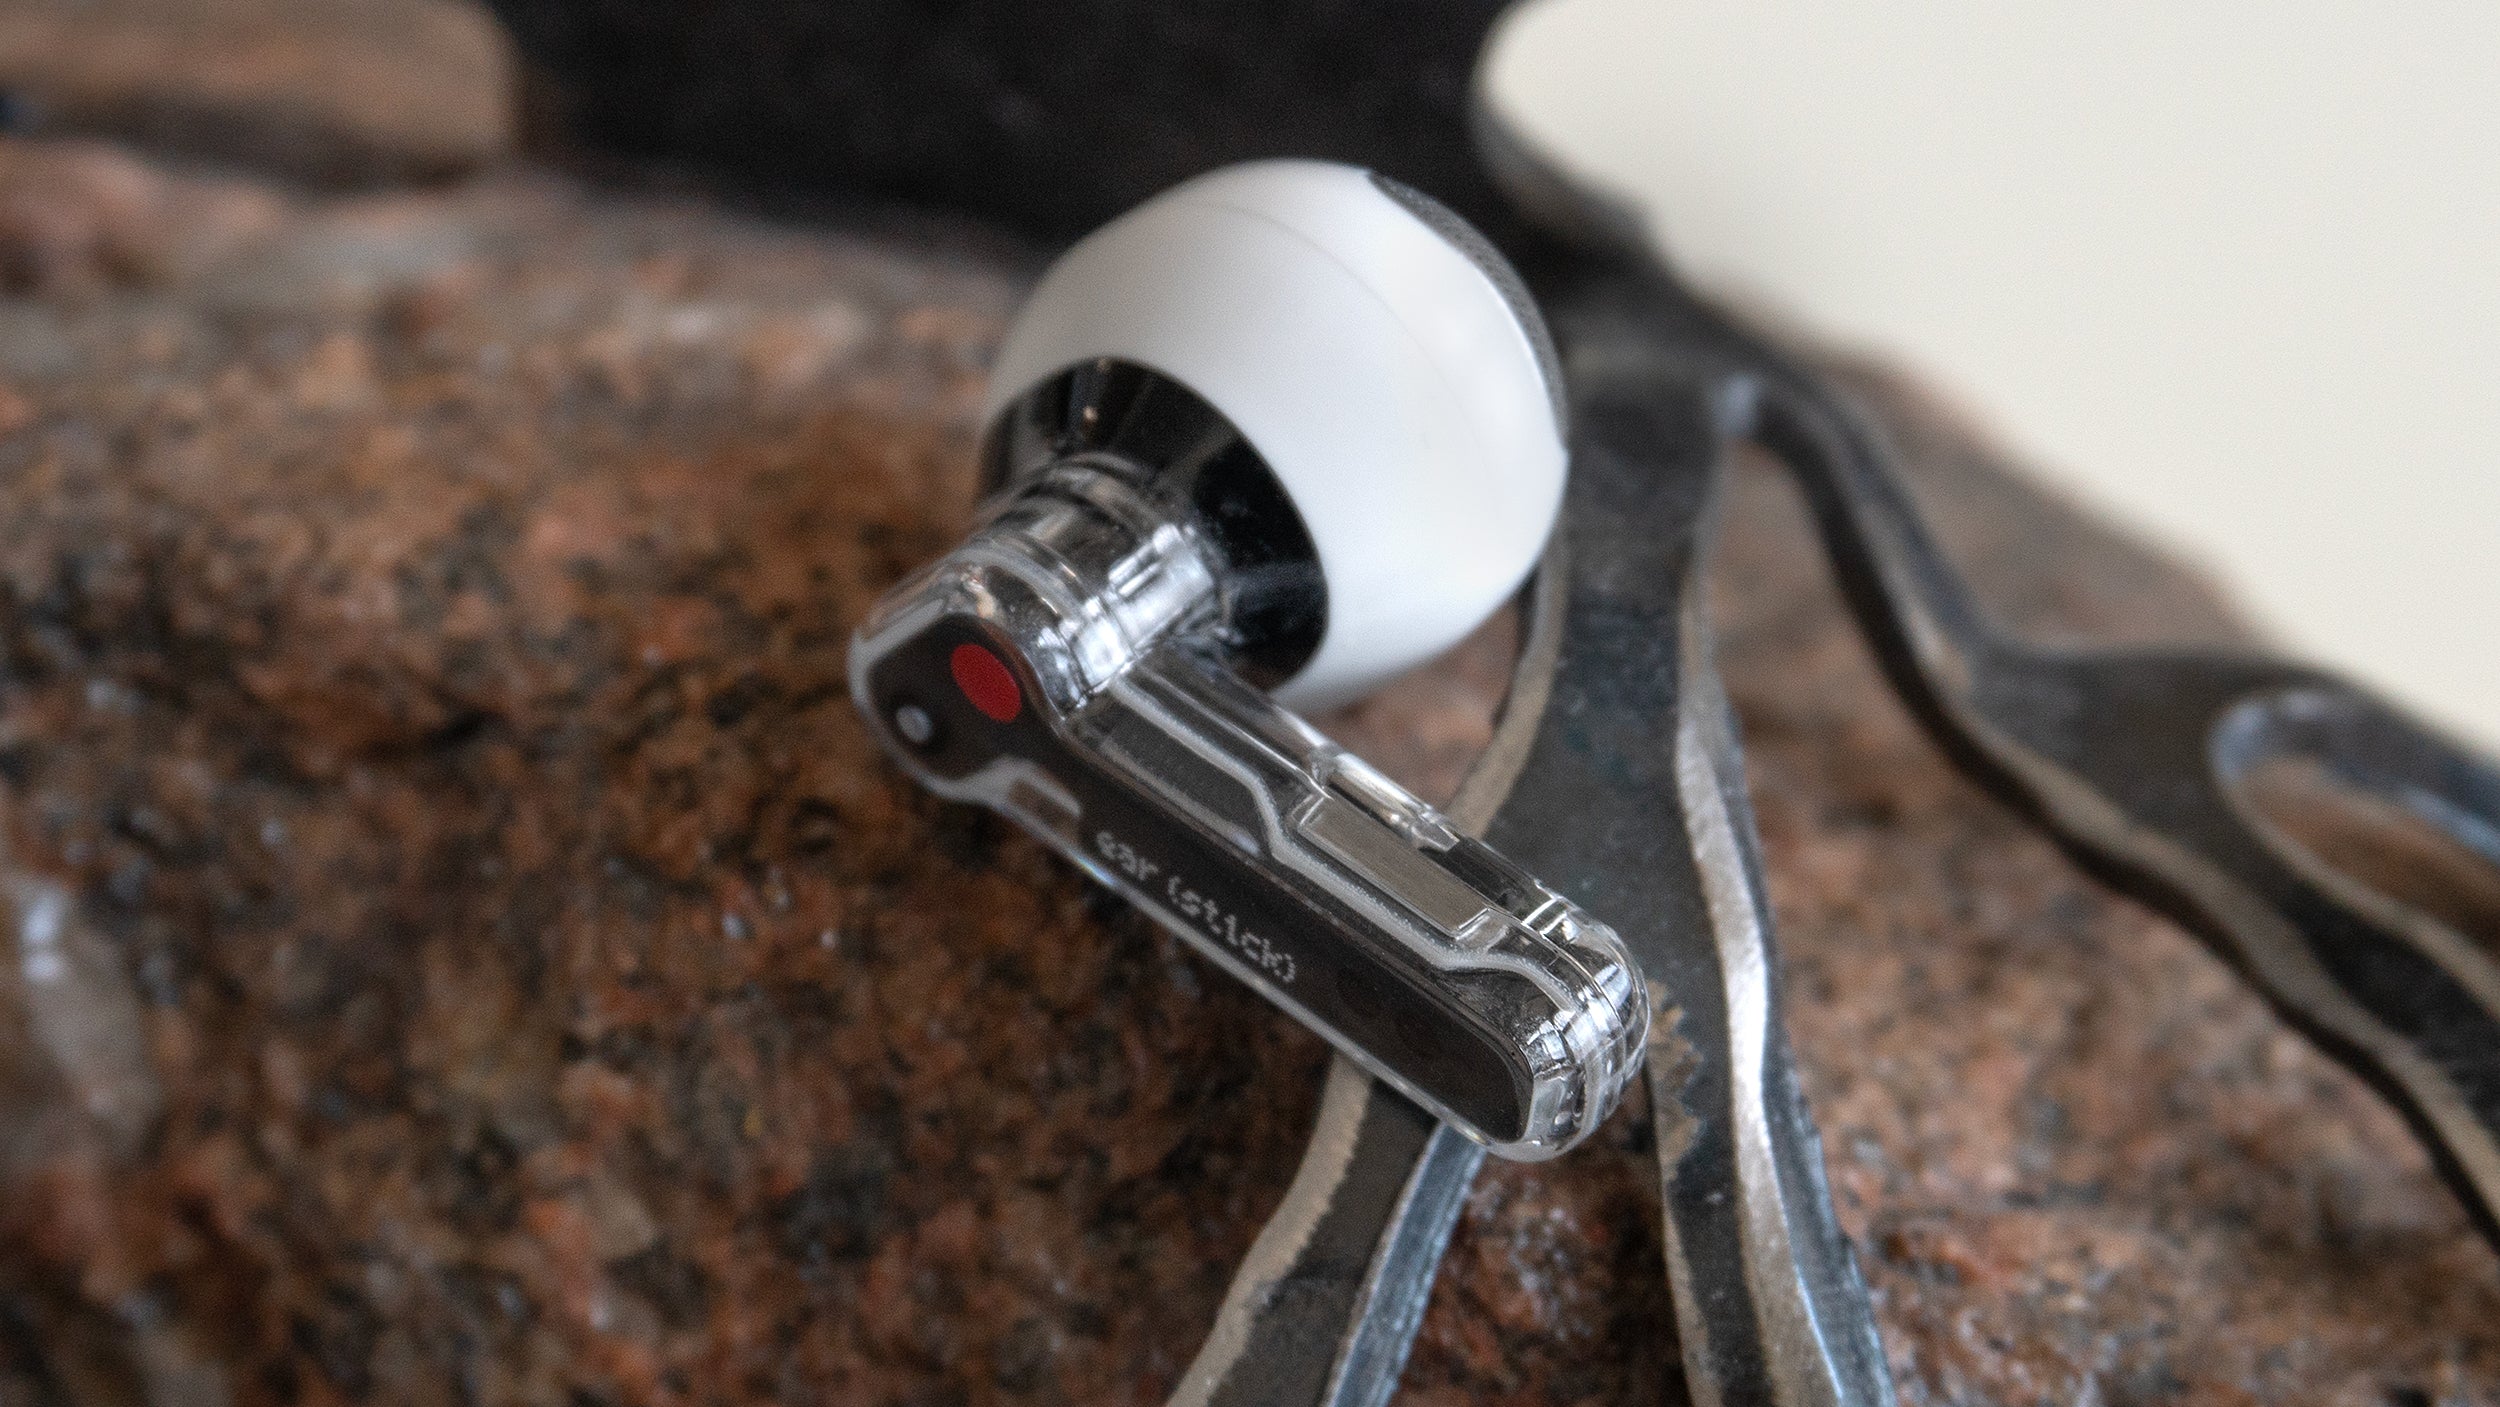 The squeeze controls on the Ear (stick)'s stem are easier and more reliable to use than the third-gen AirPod's. (Photo: Andrew Liszewski | Gizmodo)